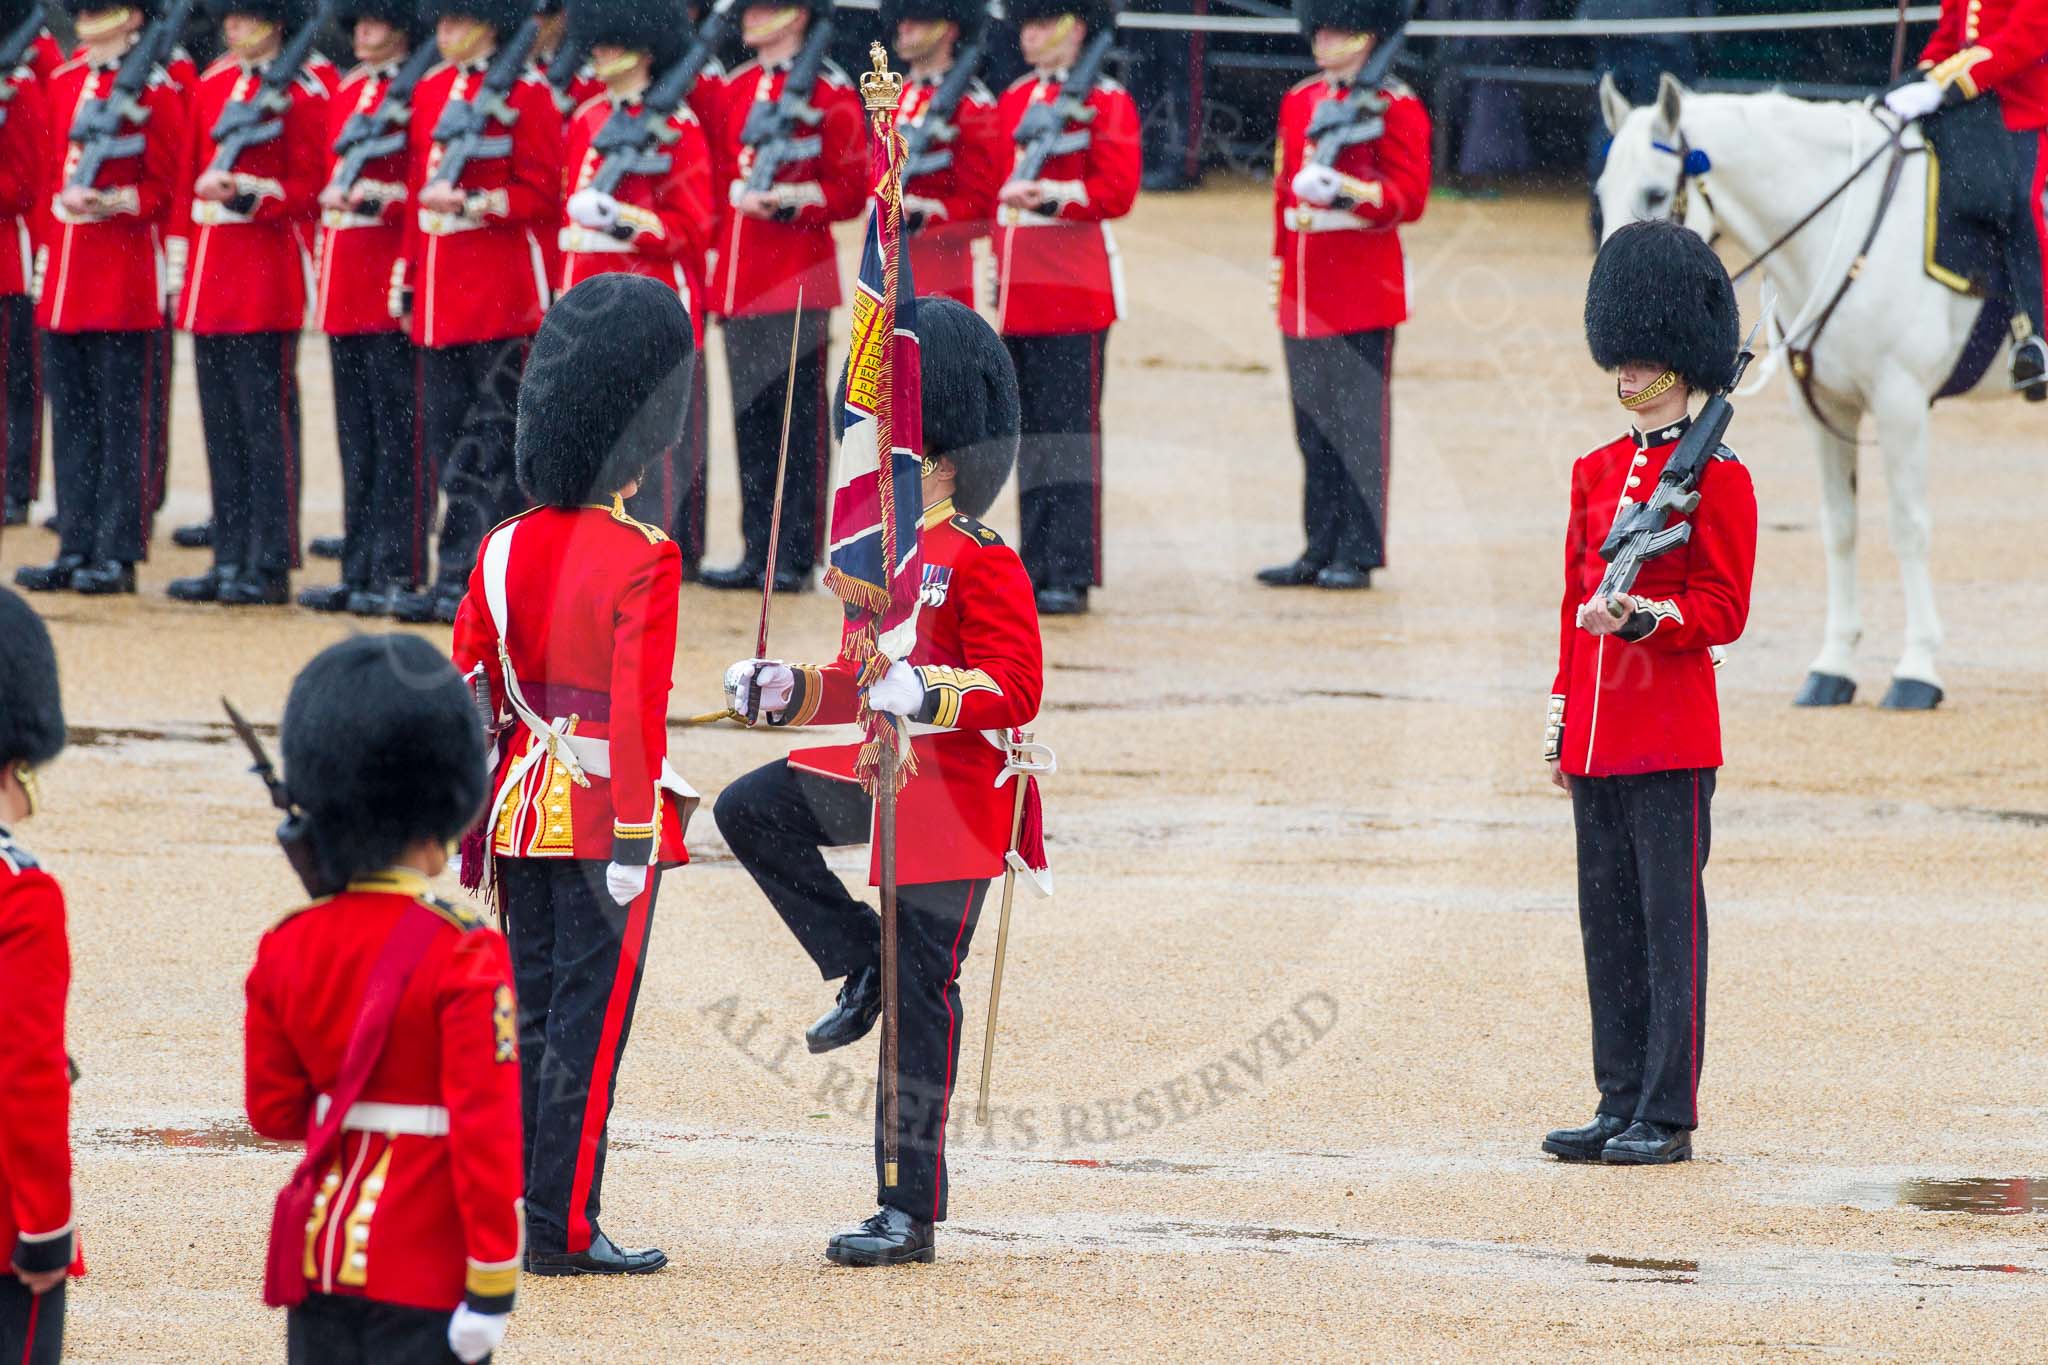 The Colonel's Review 2014.
Horse Guards Parade, Westminster,
London,

United Kingdom,
on 07 June 2014 at 11:19, image #395